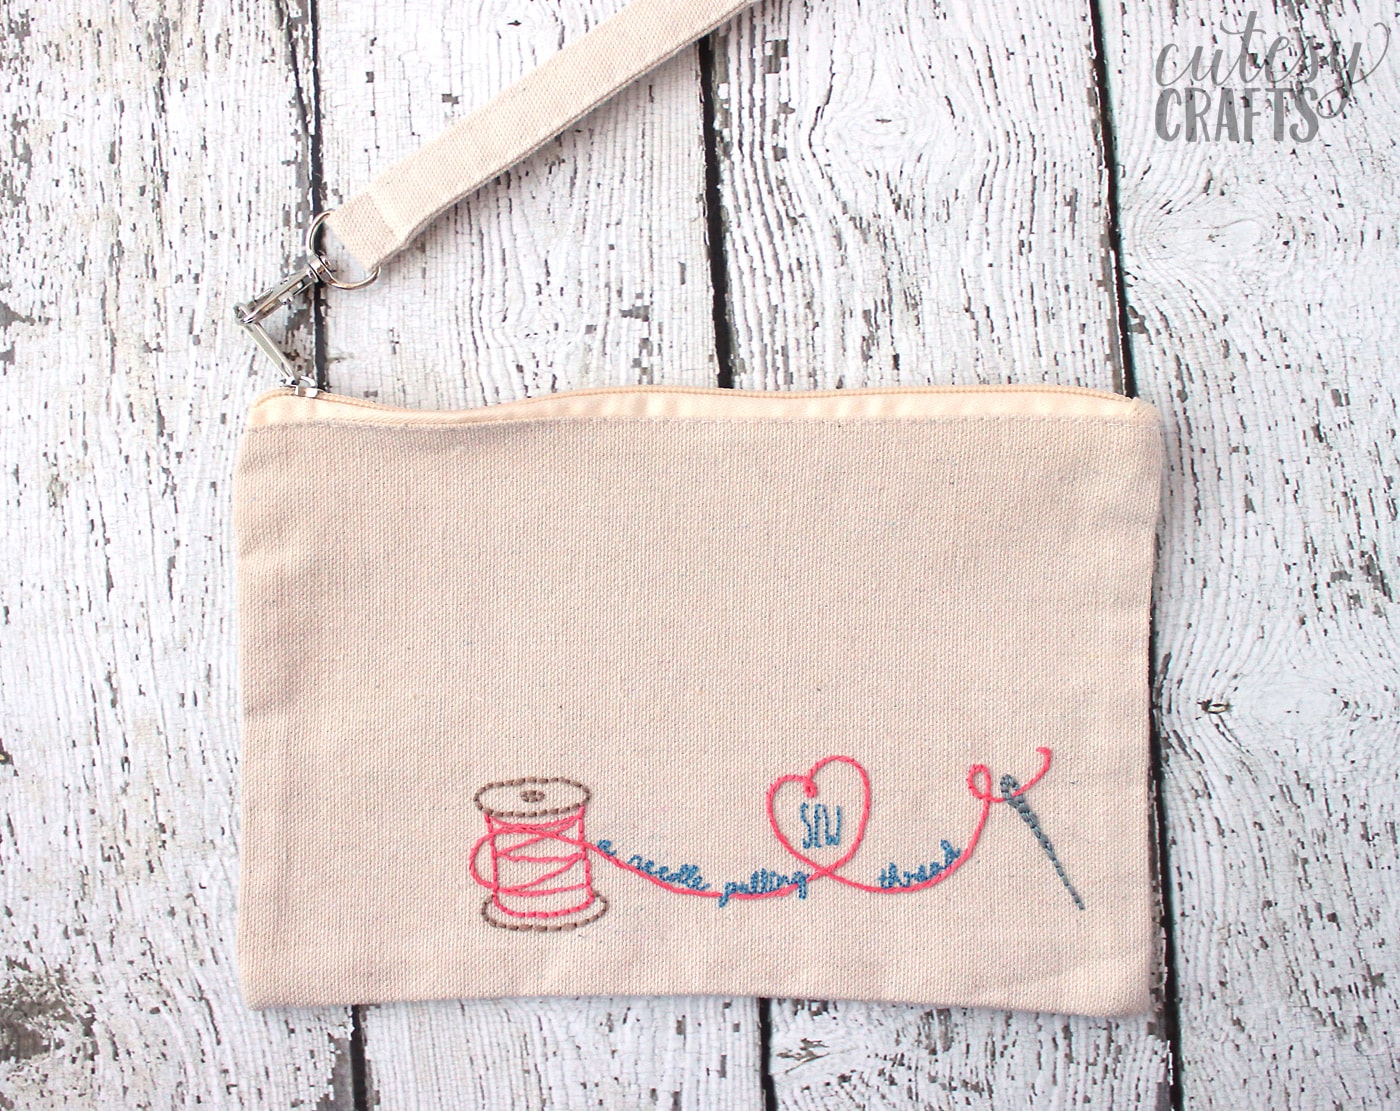 Hand embroidered zip bag on white tabletop